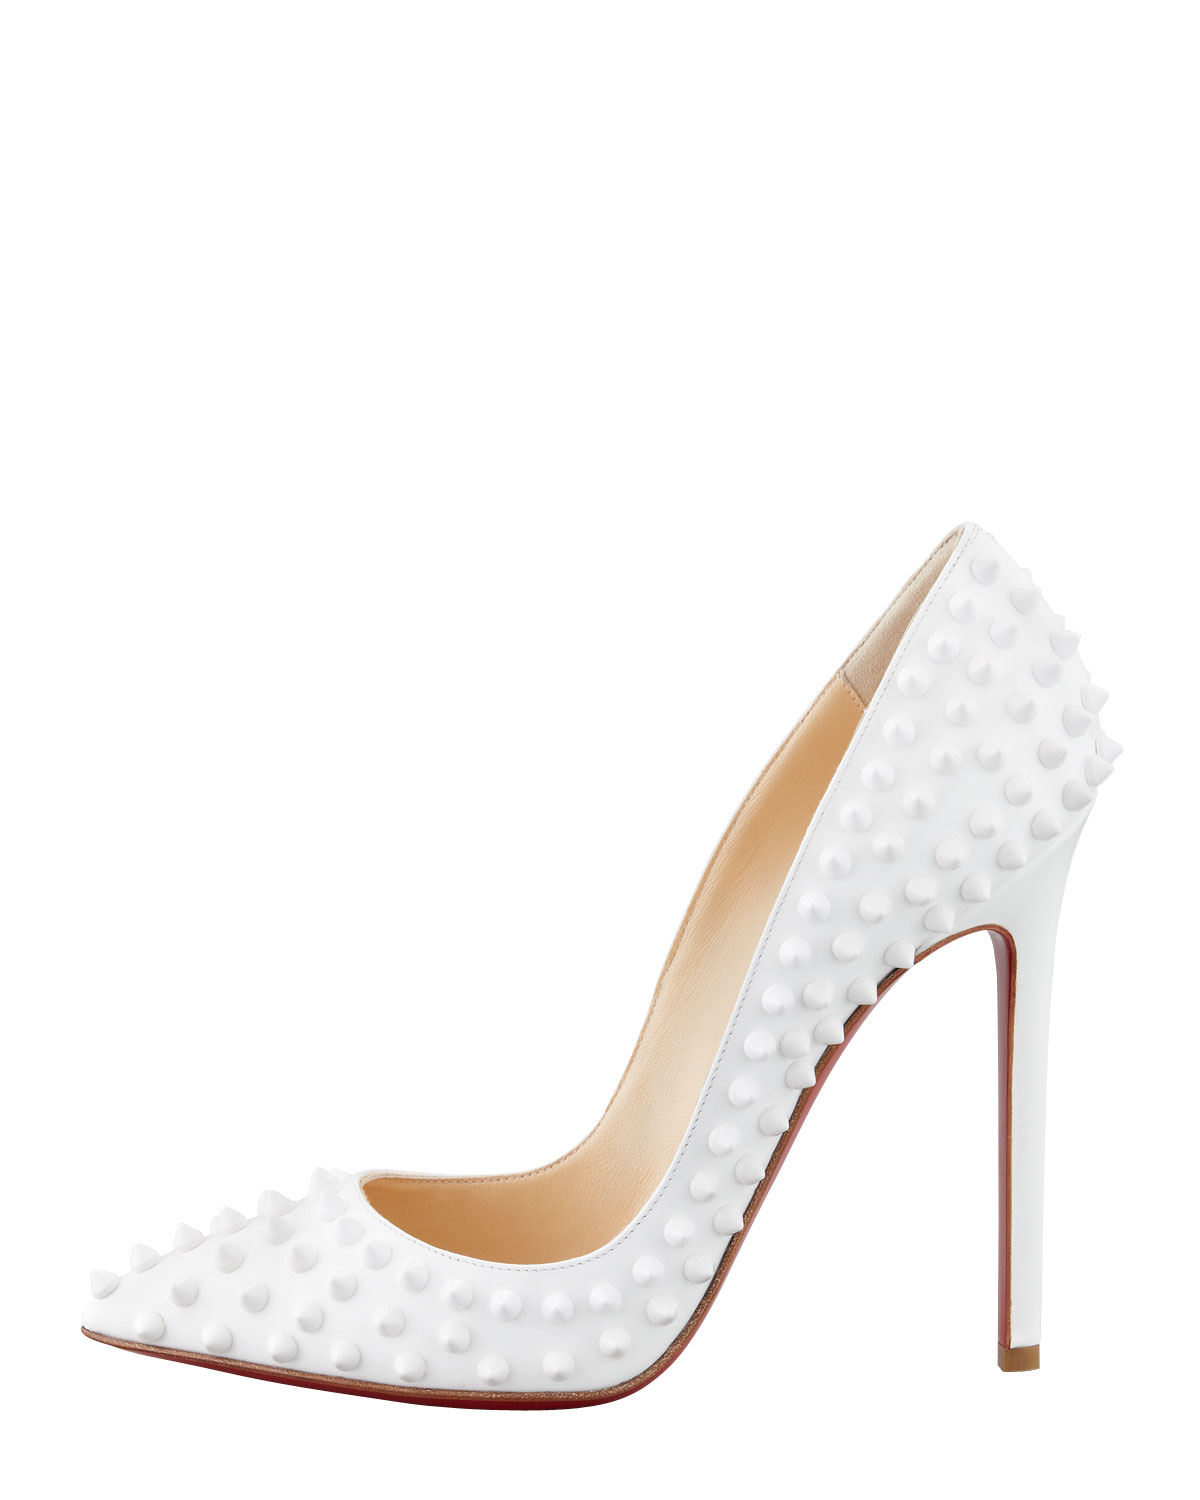 Christian louboutin Pigalle Spiked Patent Red Sole Pumps in White | Lyst